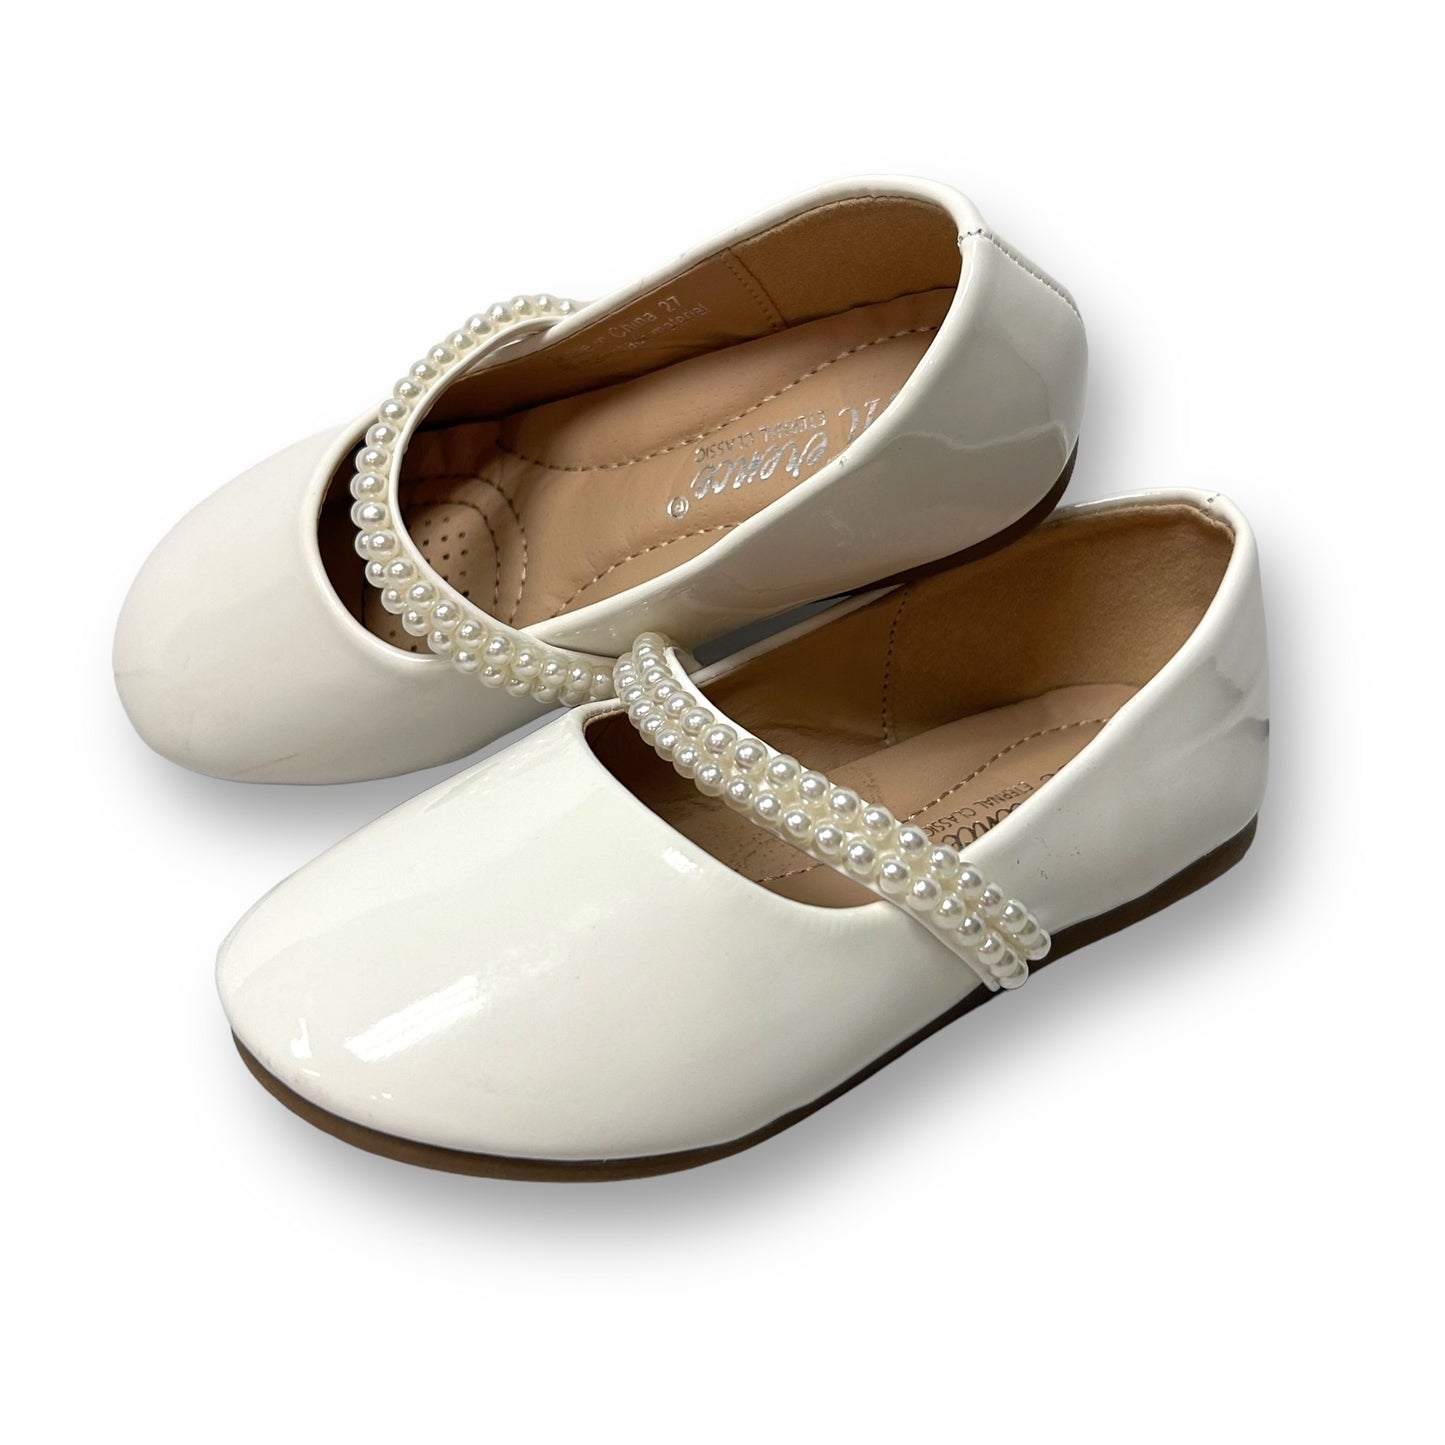 Merence Toddler Girl Size 9 (27) White Pearl Strap Dress Shoes